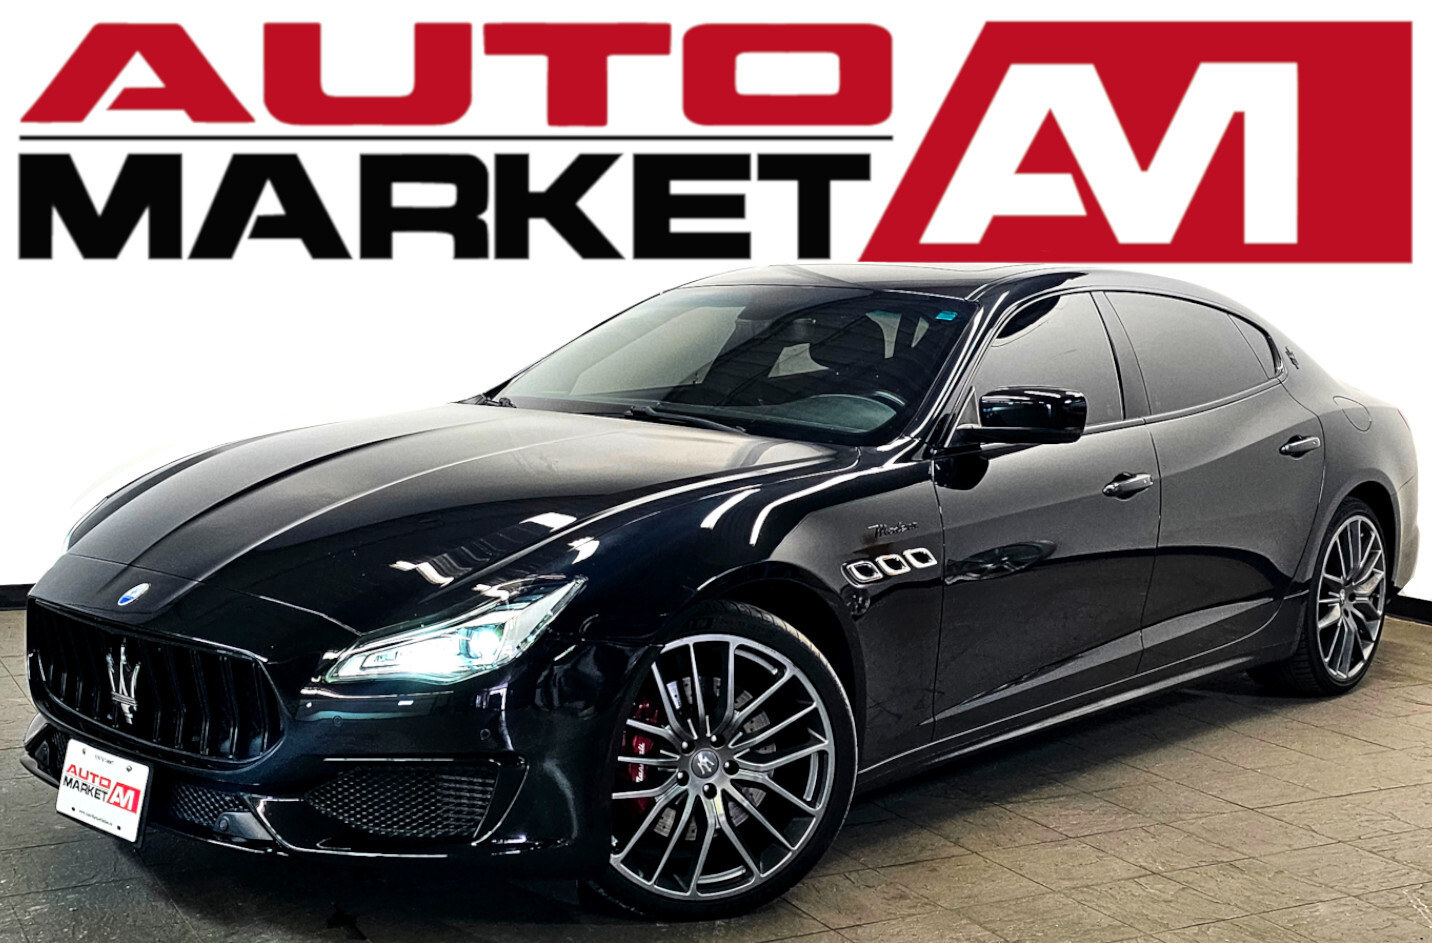 2014 Maserati Quattroporte S Q4 Beautiful S Q4 that has been dressed to look 